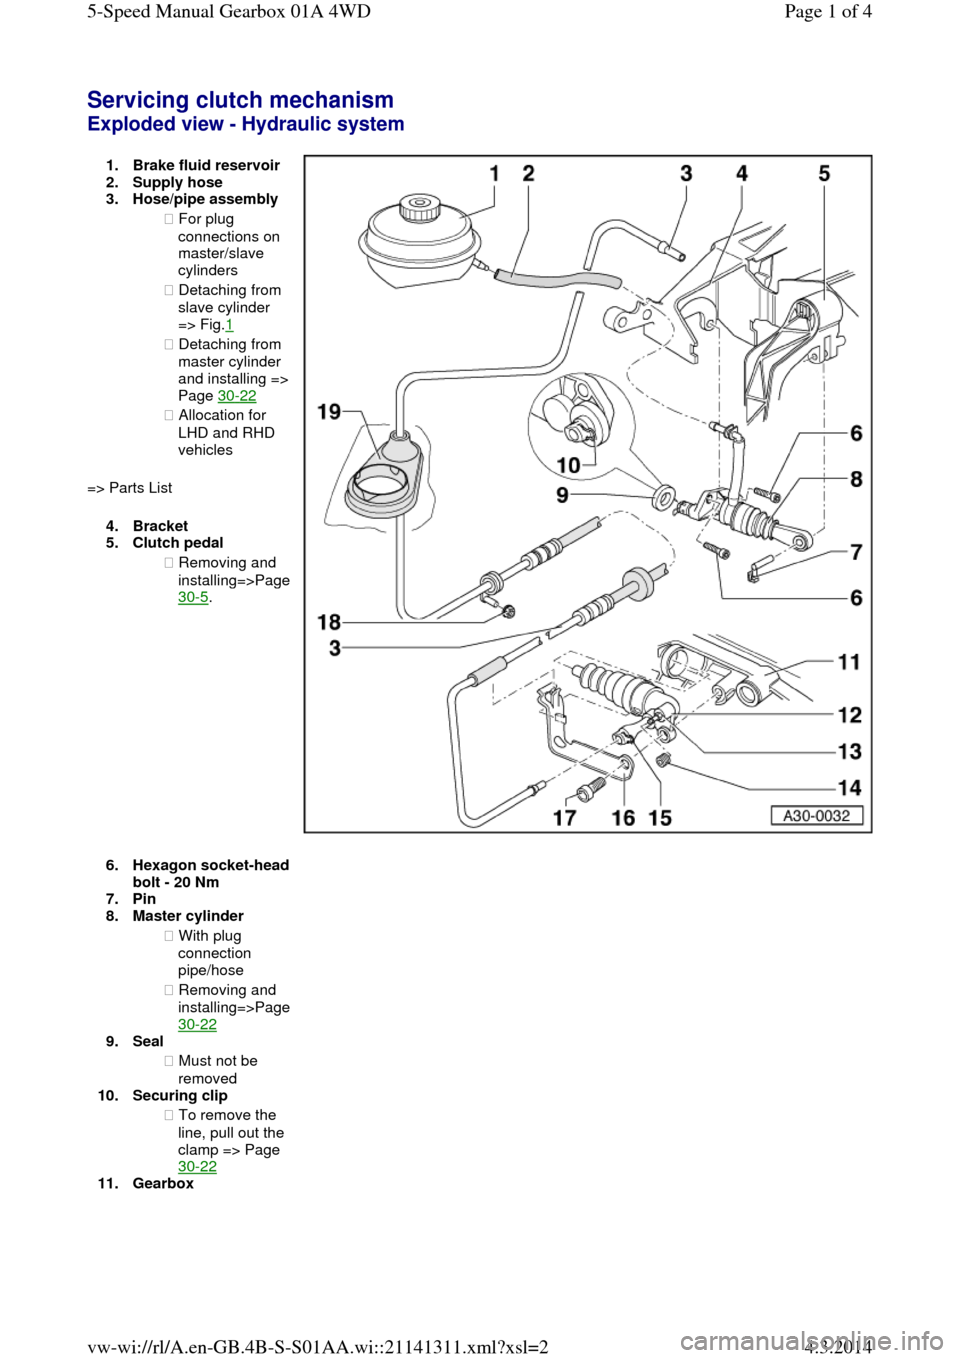 AUDI A6 2000 C5 / 2.G Changing Clutch 5Speed Manual Gearbox Servicing clutch mechanism Exploded view - Hydraulic system  1.Brake fluid reservoir  2.Supply hose  
3.Hose/pipe assembly 
◆ For plug 
connections on 
master/slave 
cylinders  
◆ Detaching from 
